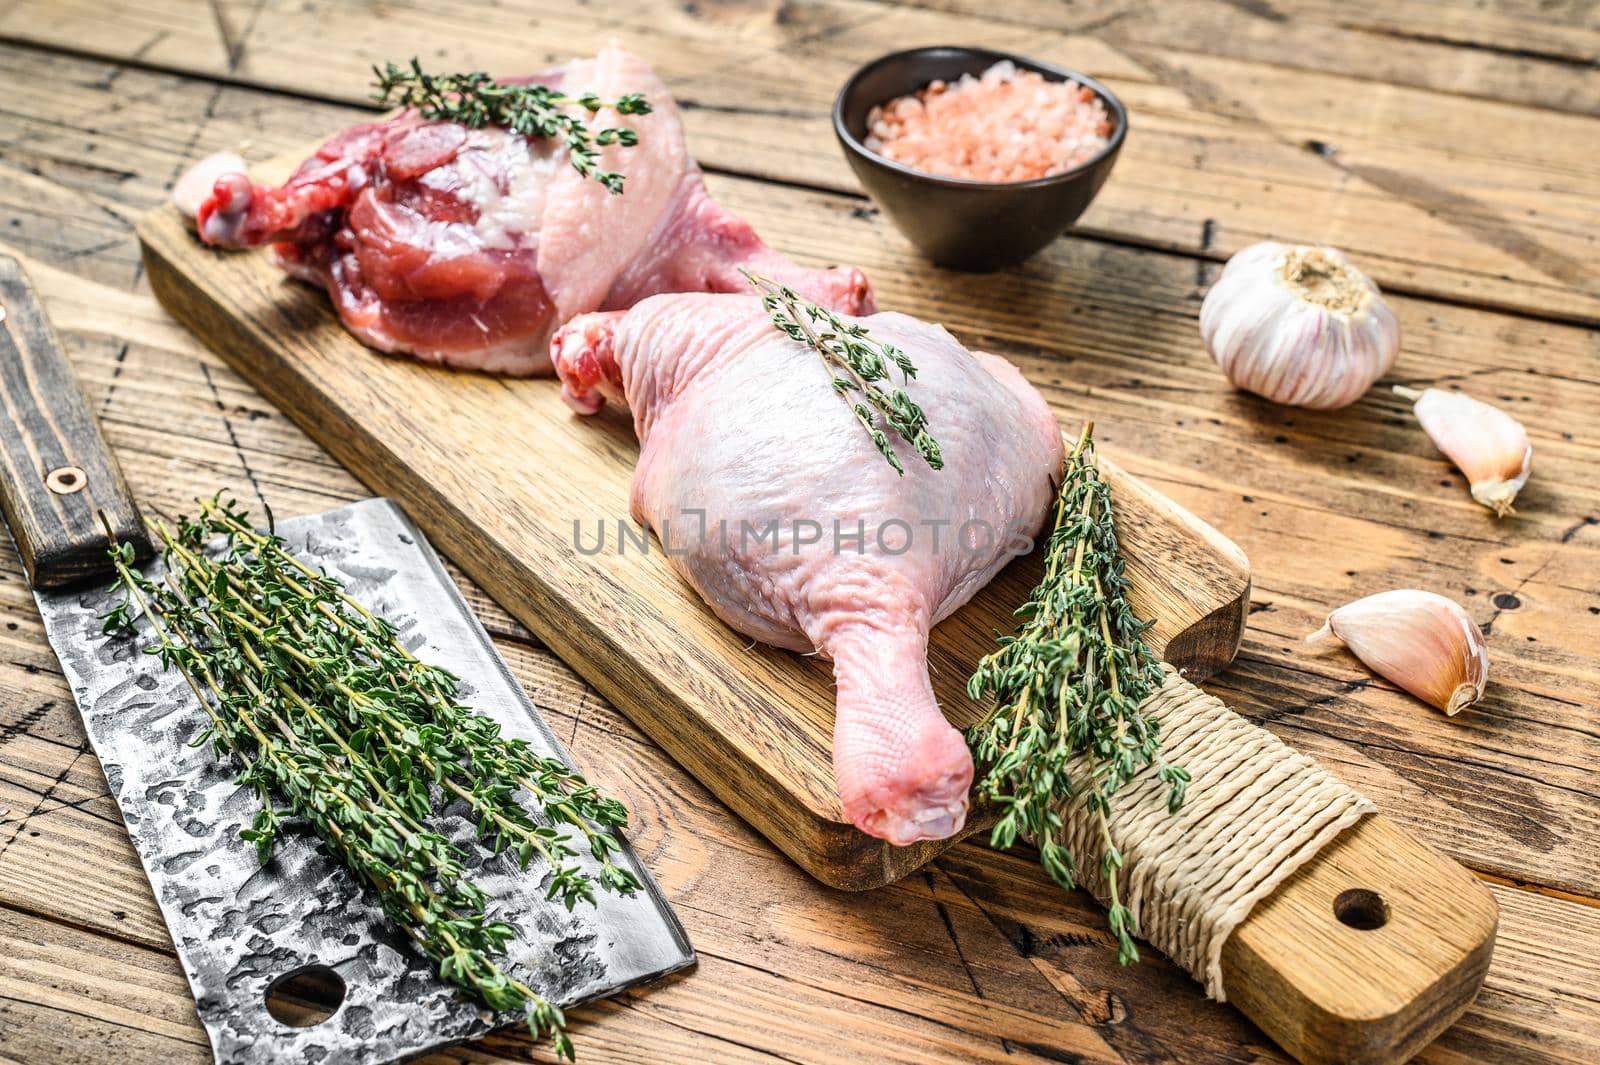 Duck legs on cutting board, Raw meat. Wooden background. Top view by Composter